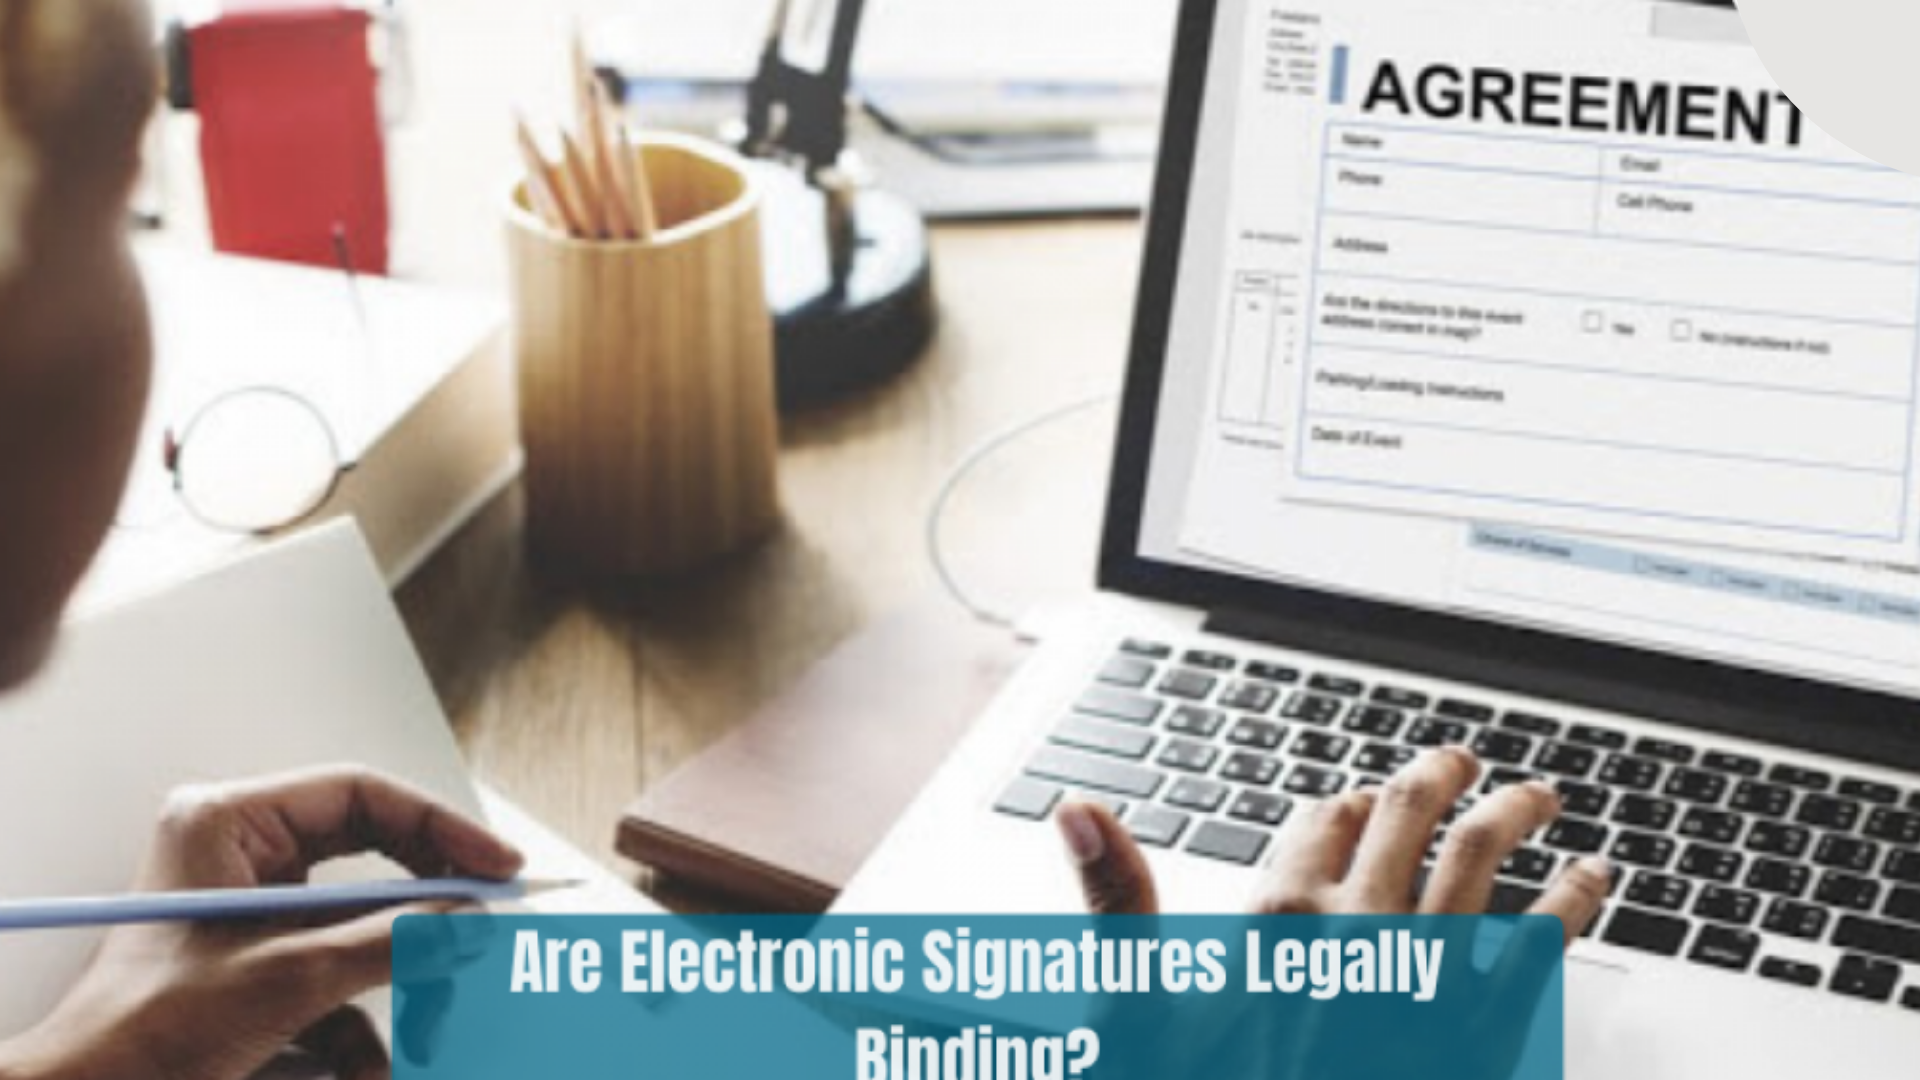 Are Electronic Signatures Legally Binding?